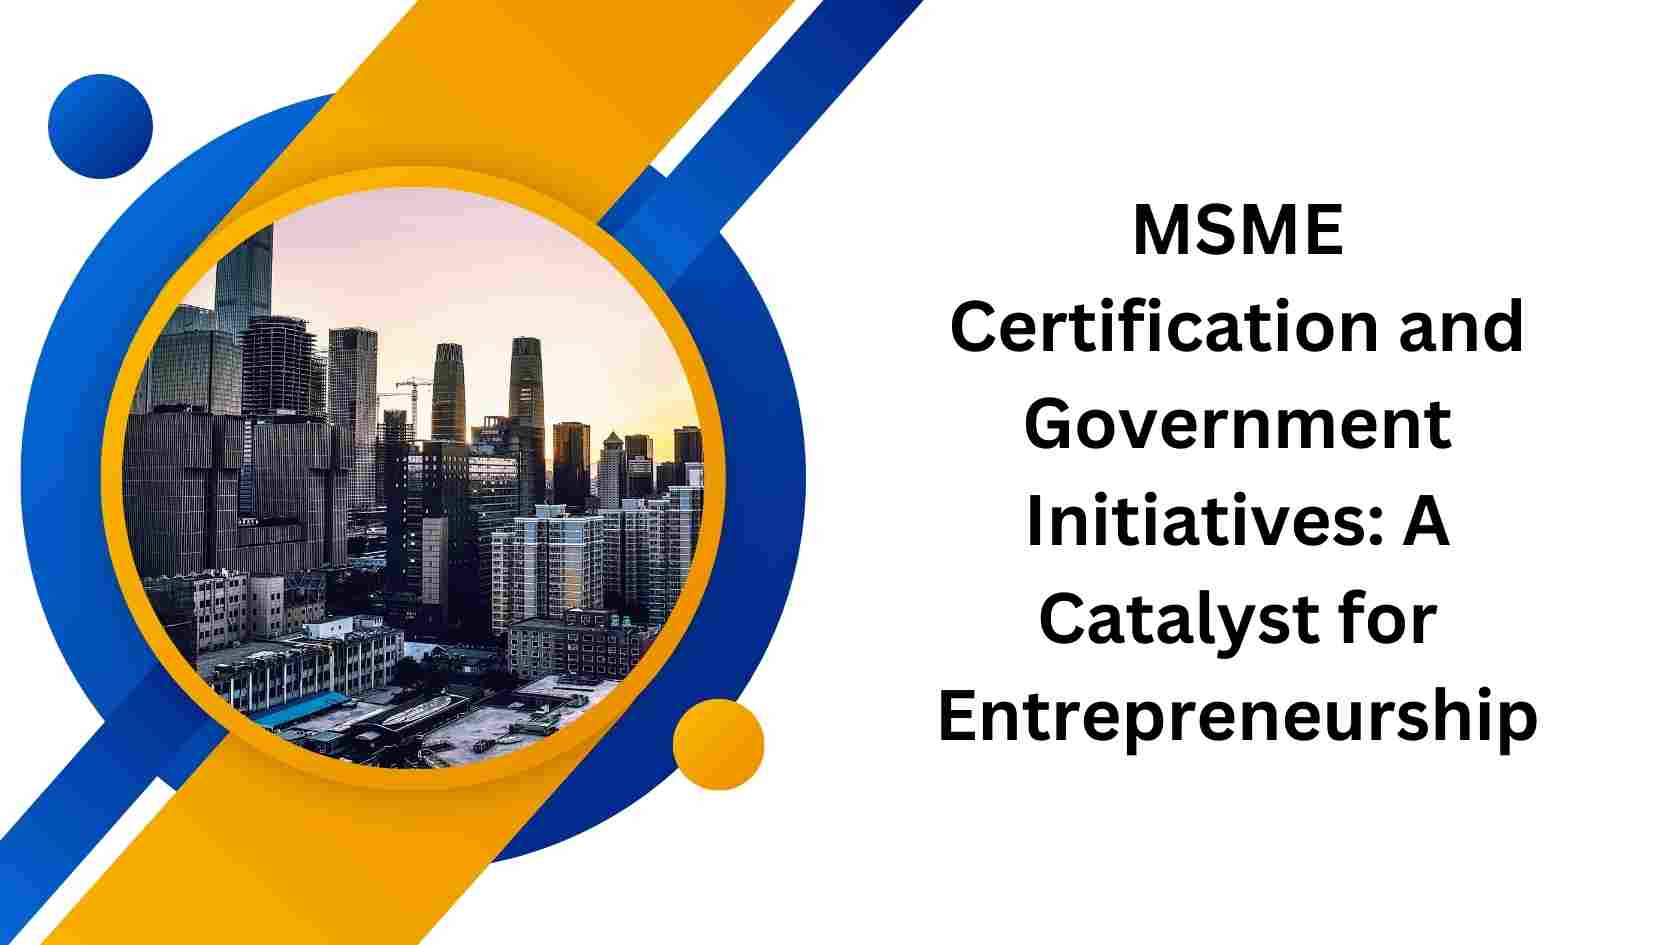 MSME Certification and Government Initiatives A Catalyst for Entrepreneurship